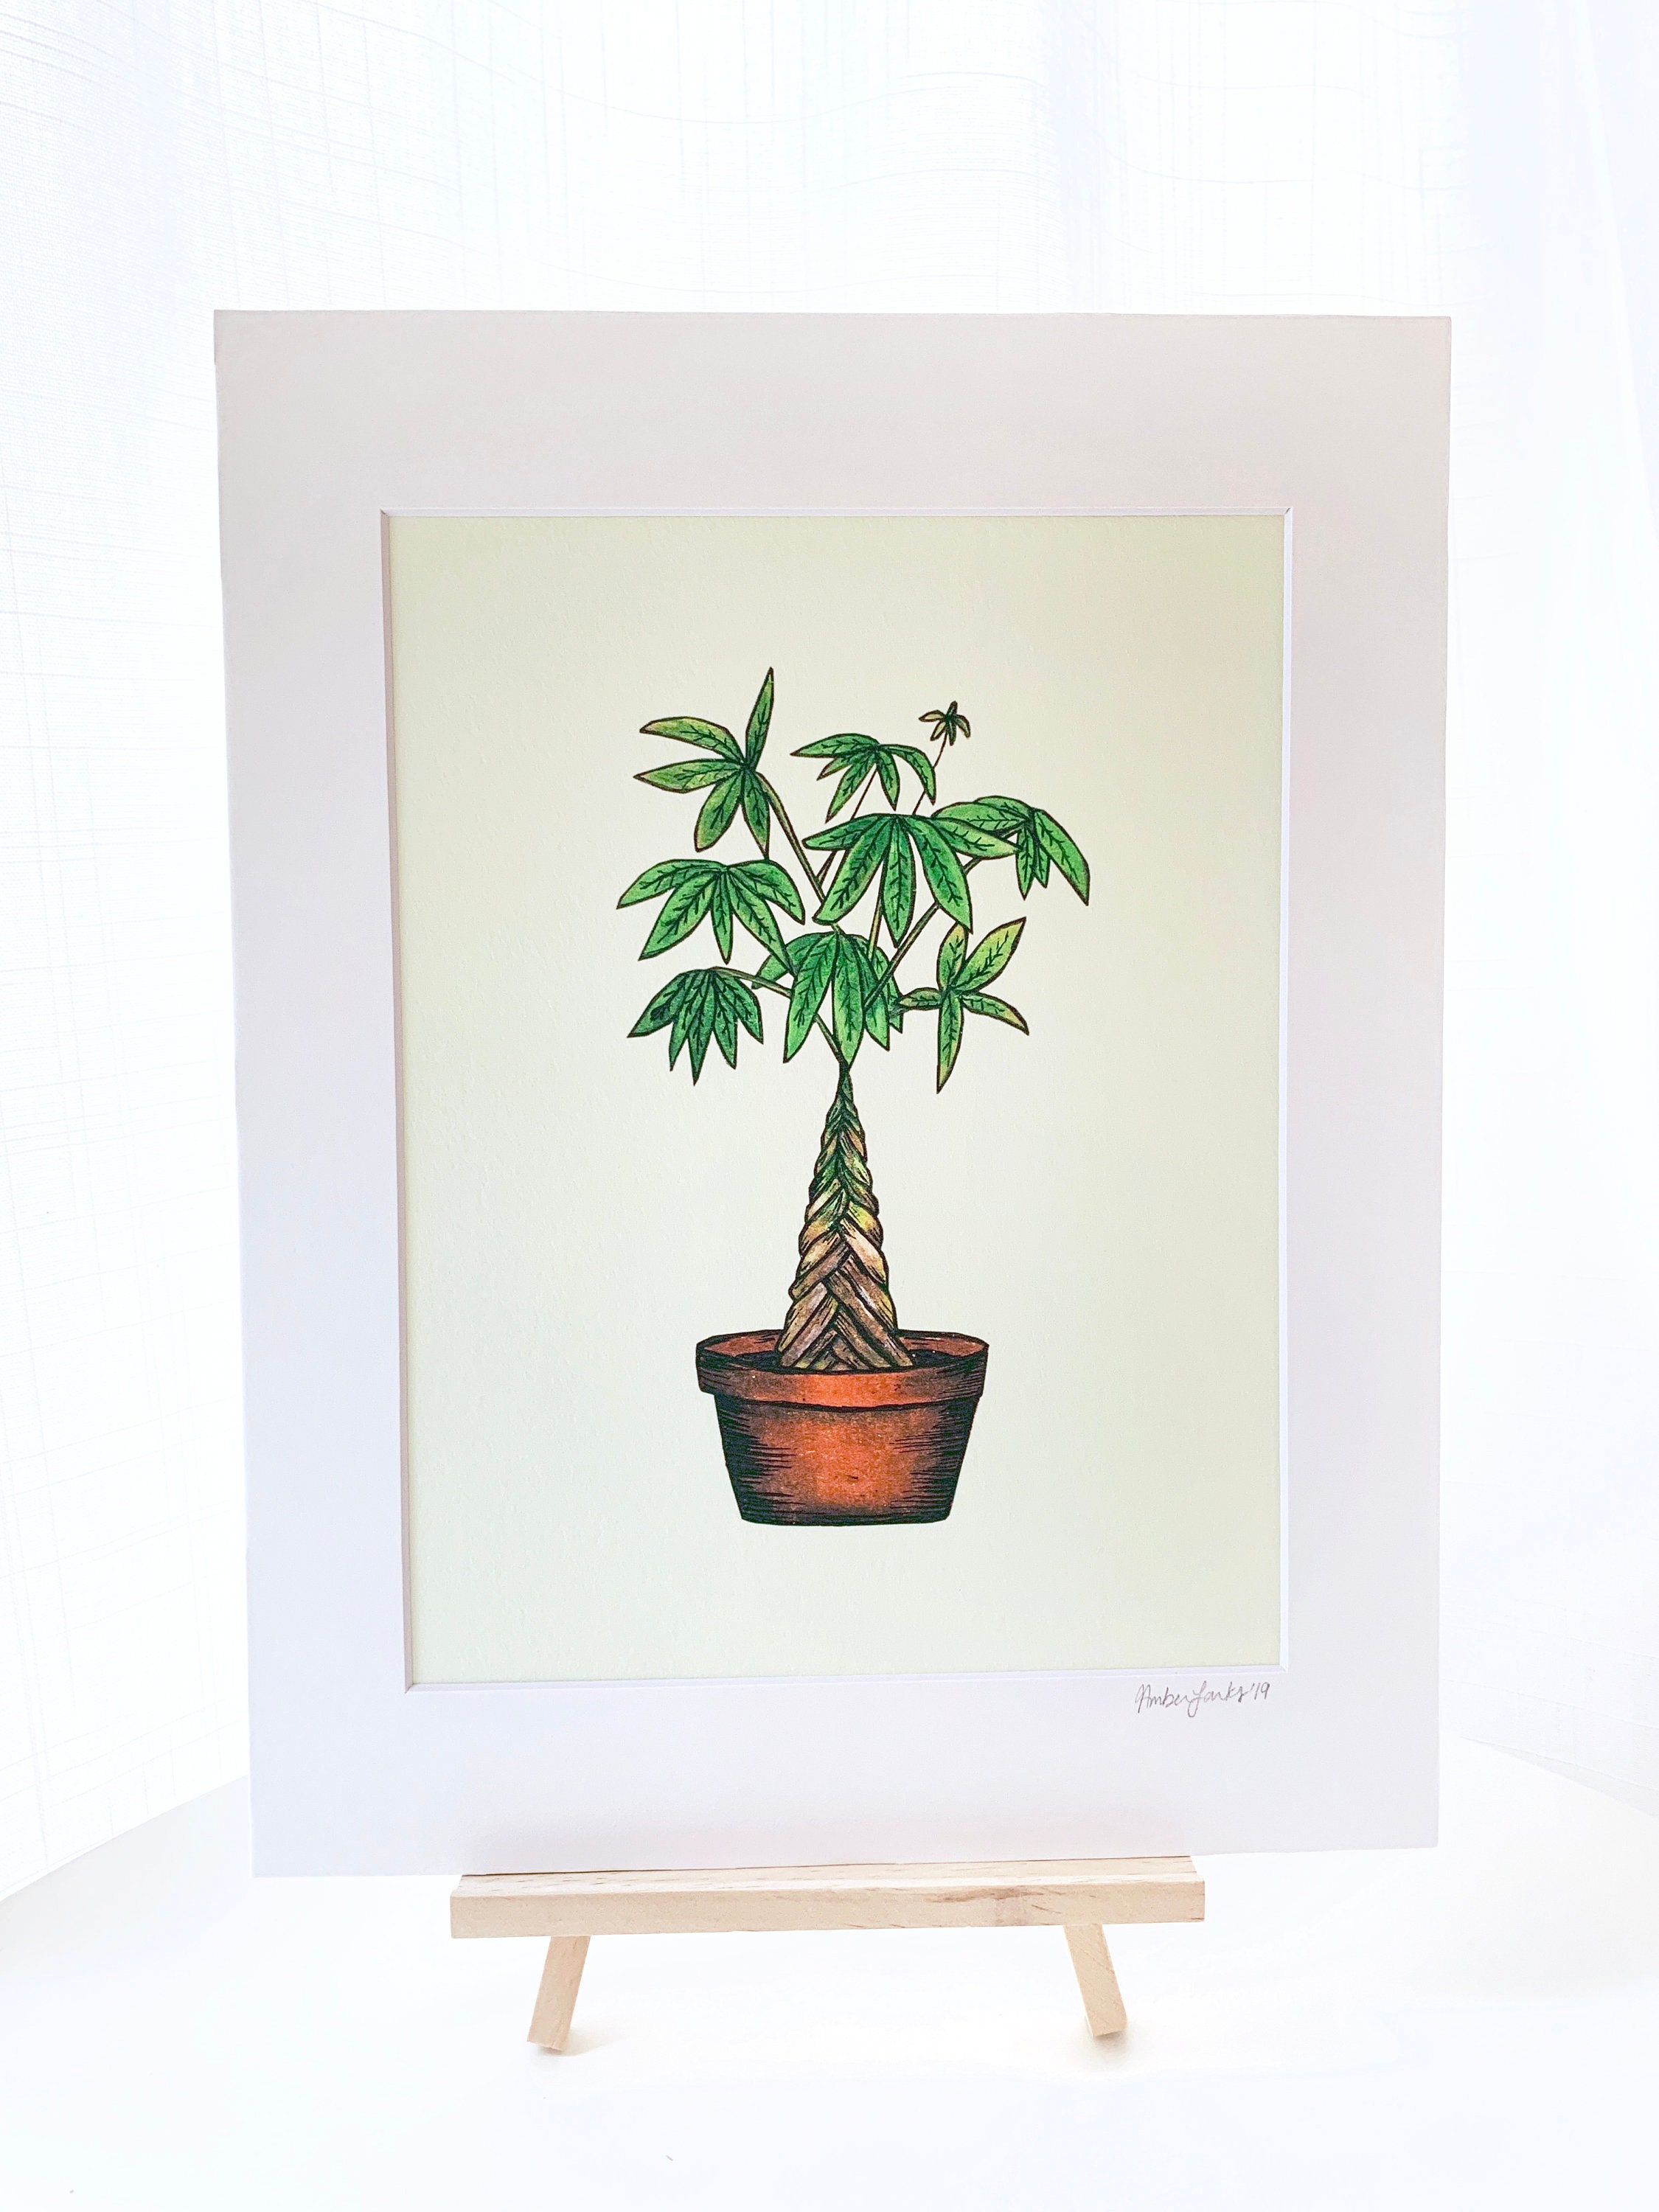 Drawing Plant Sketch, money tree, white, leaf png | PNGEgg